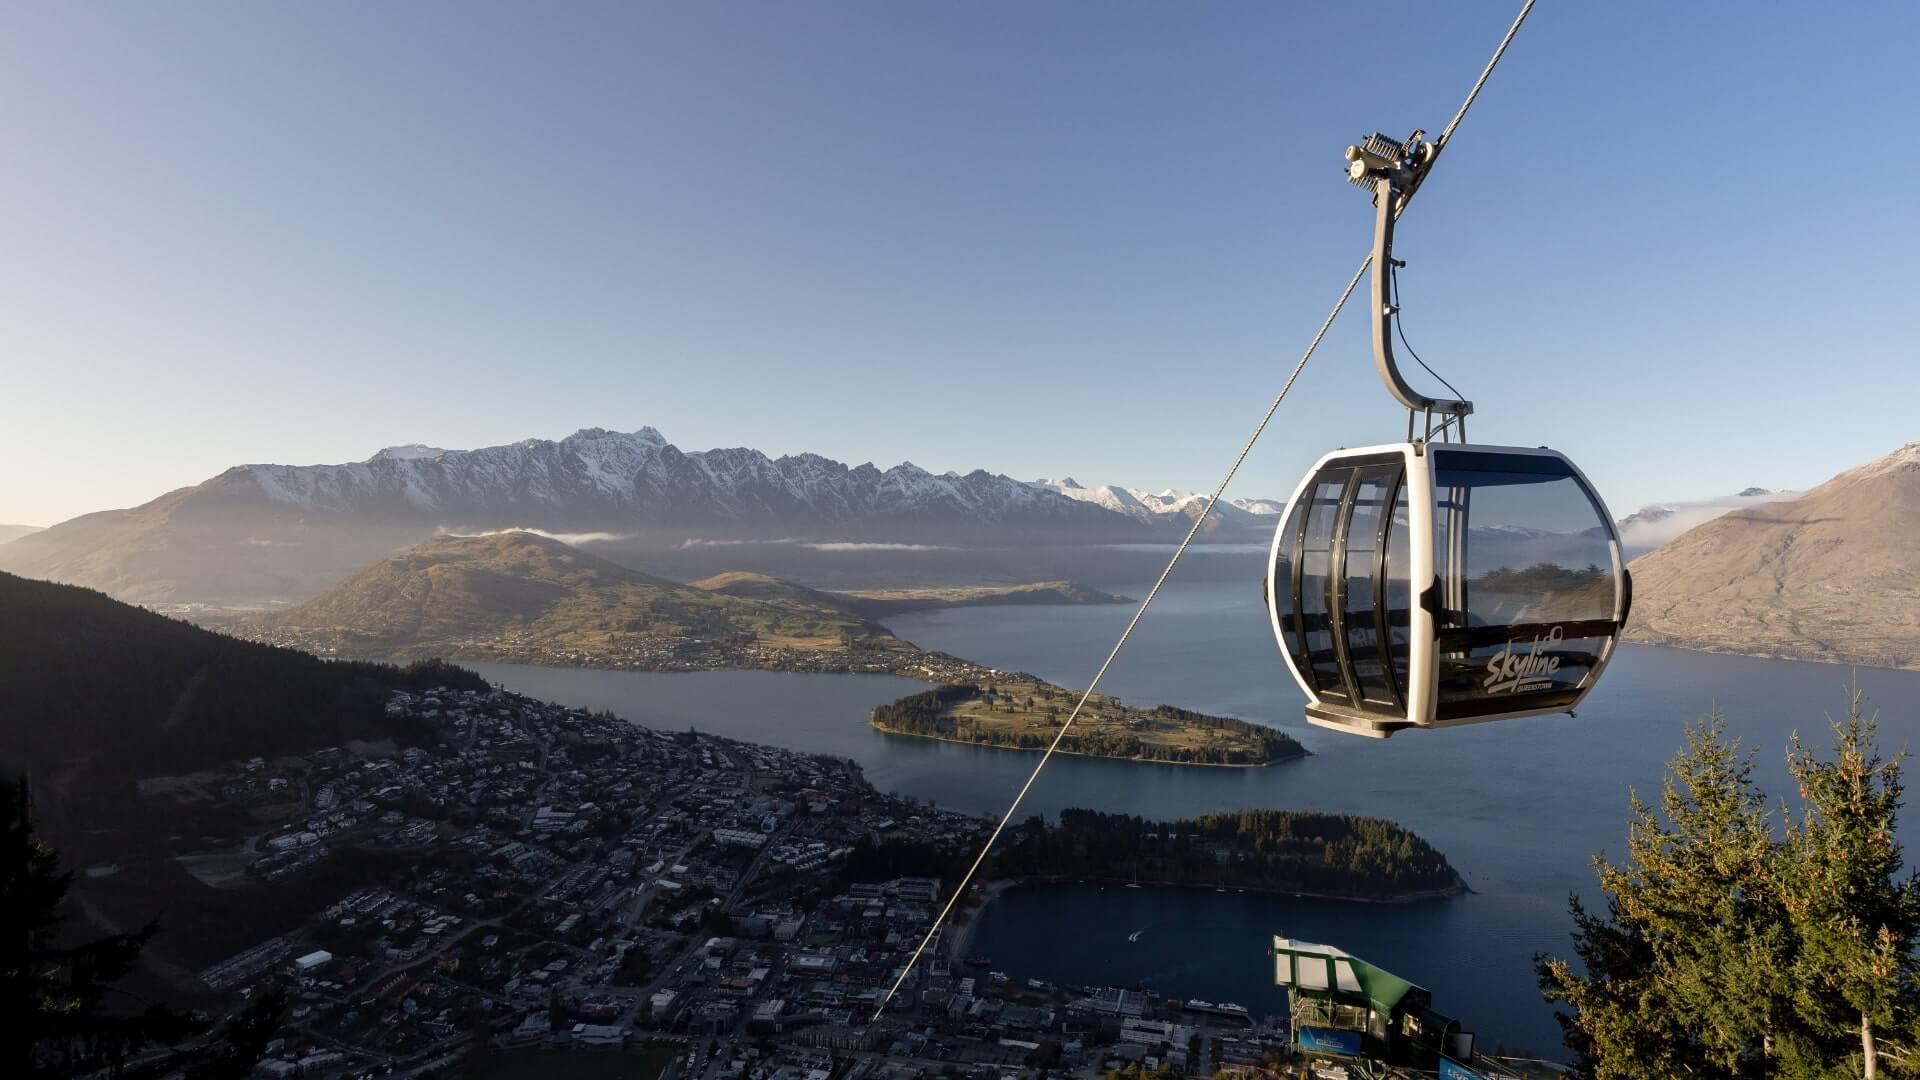 Skyline Queenstown Gondola with views of the Remarkables behind.